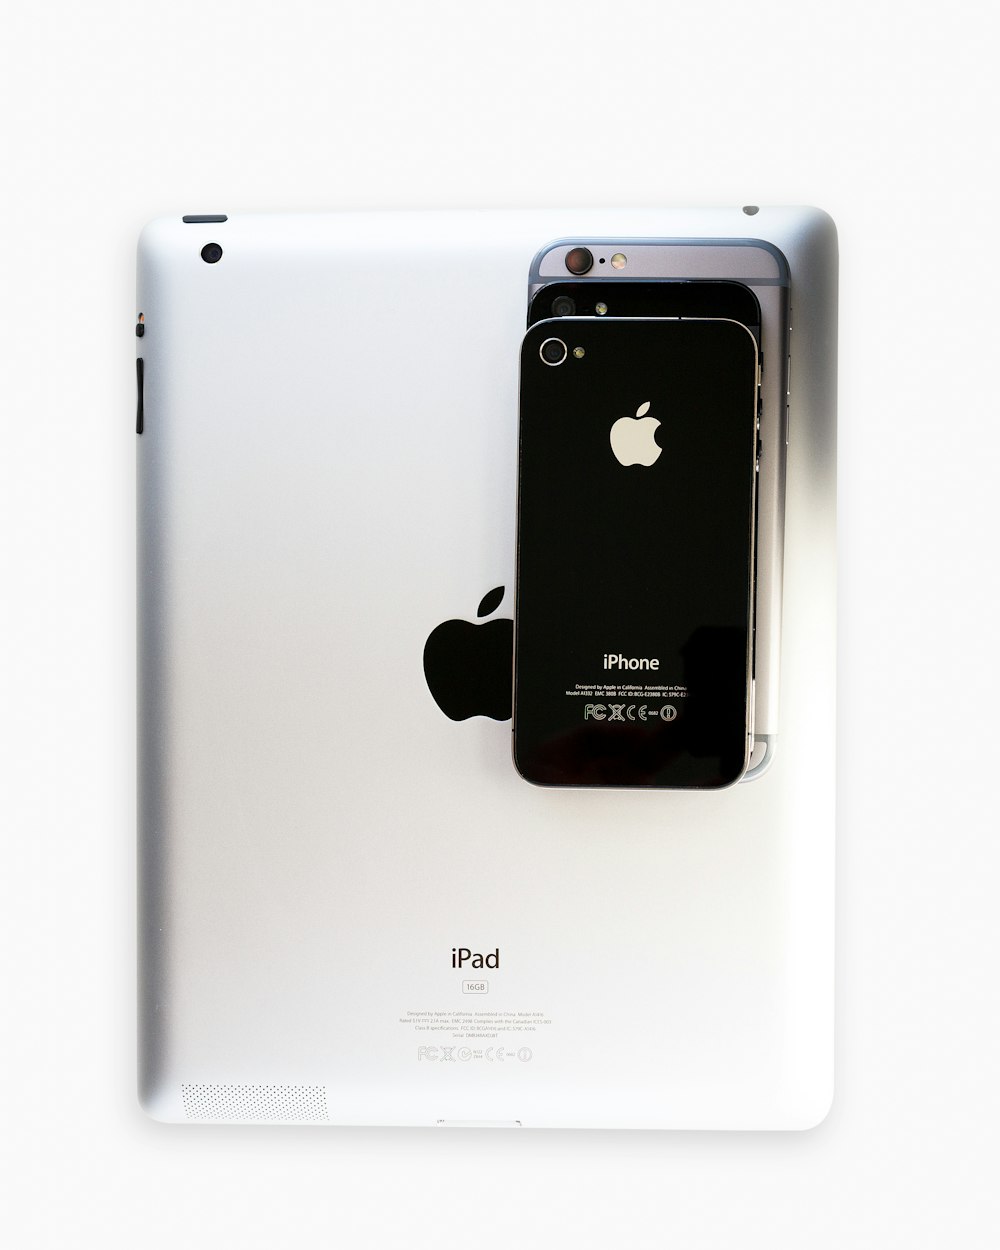 silver iPad, black iPhone 4, black iPhone 5 and space gray iPhone 6